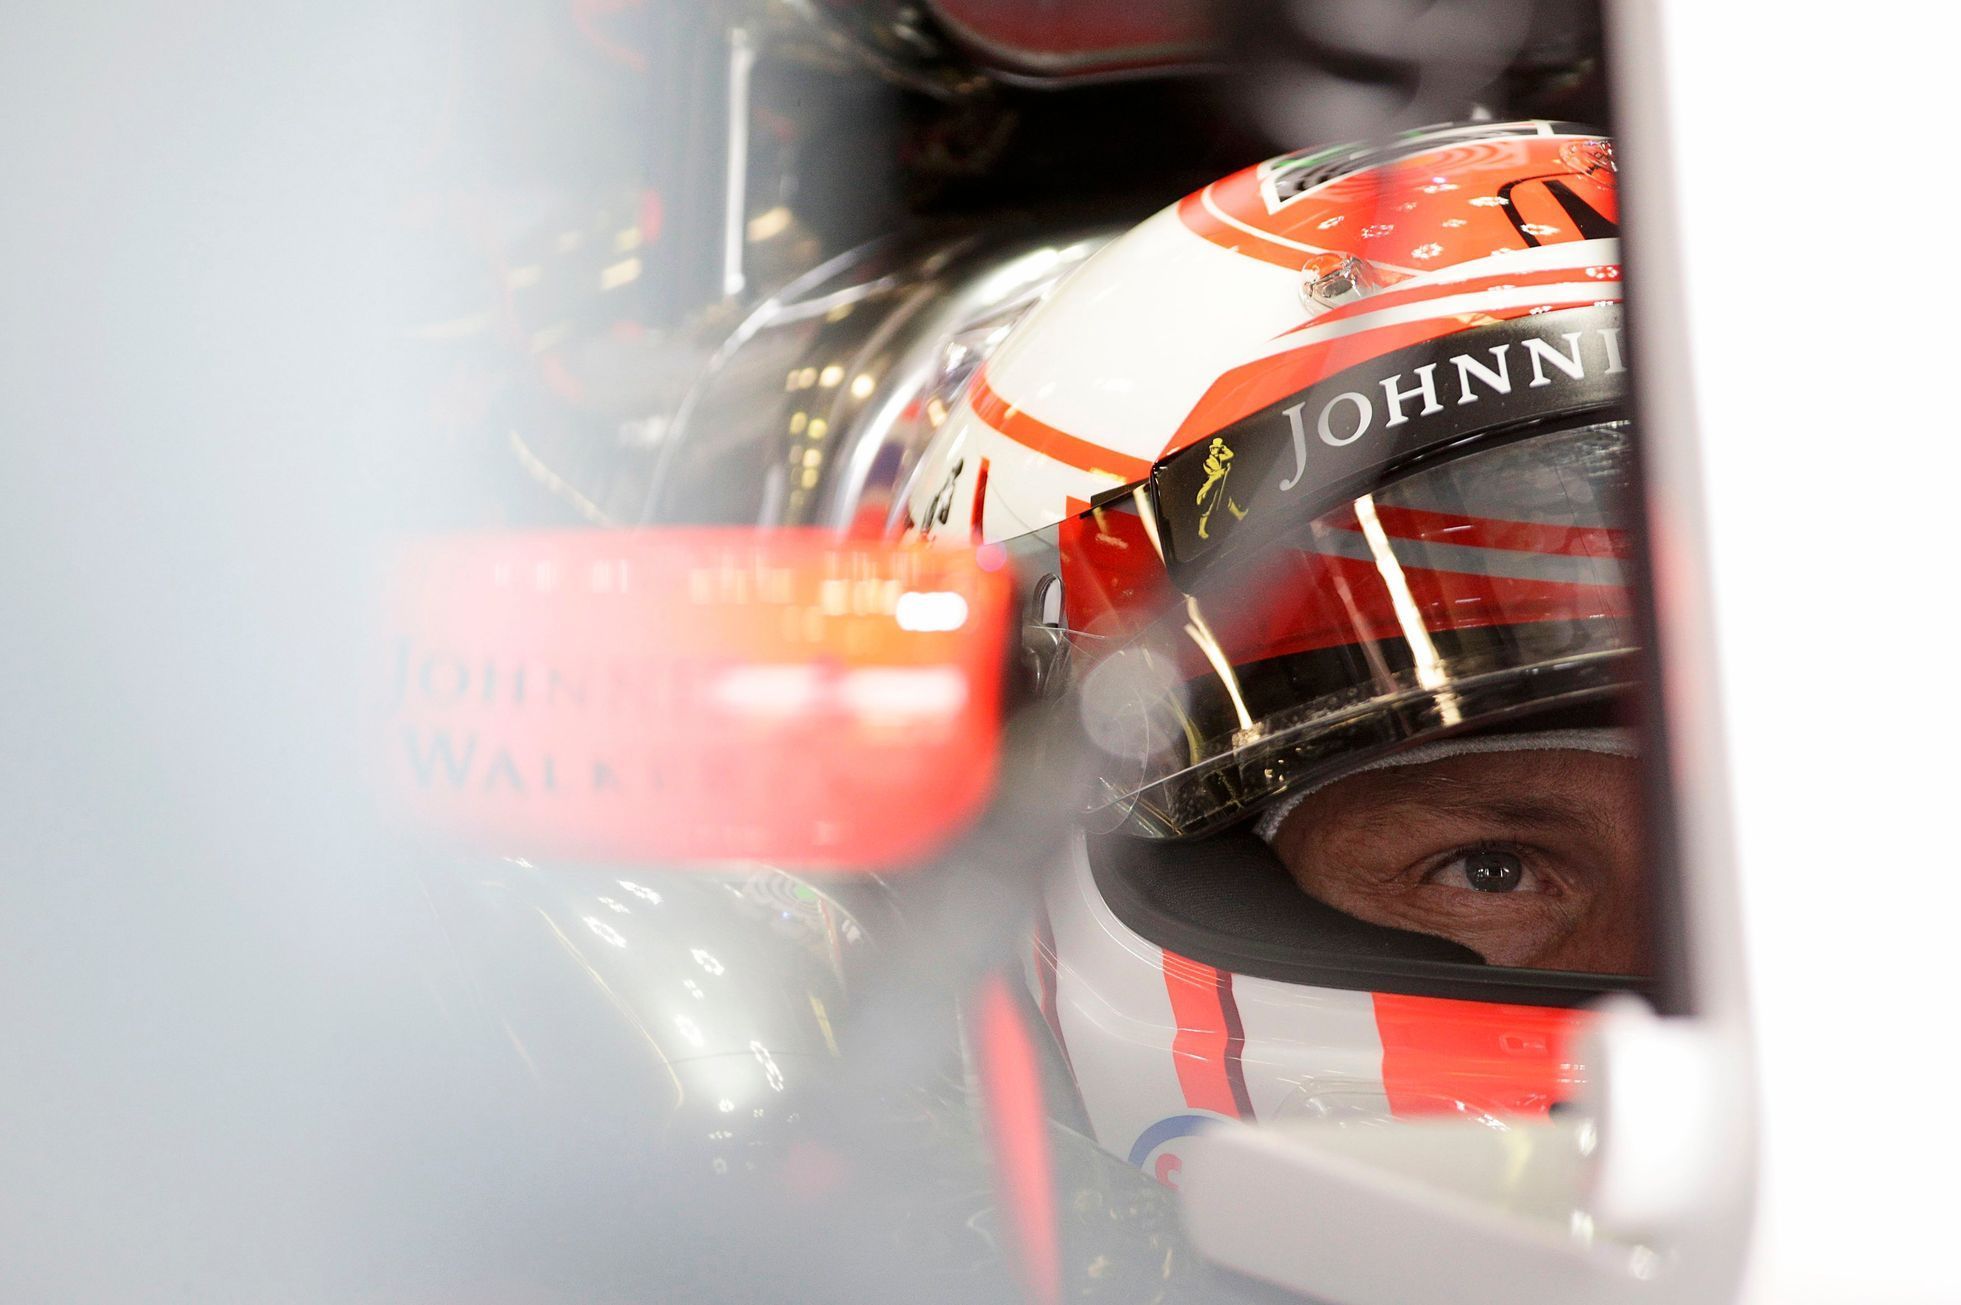 McLaren Formula One driver Jenson Button of Britain sits in his car in the team garage during the third practice session of the Australian F1 Grand Prix at the Albert Park circuit in Melbourne